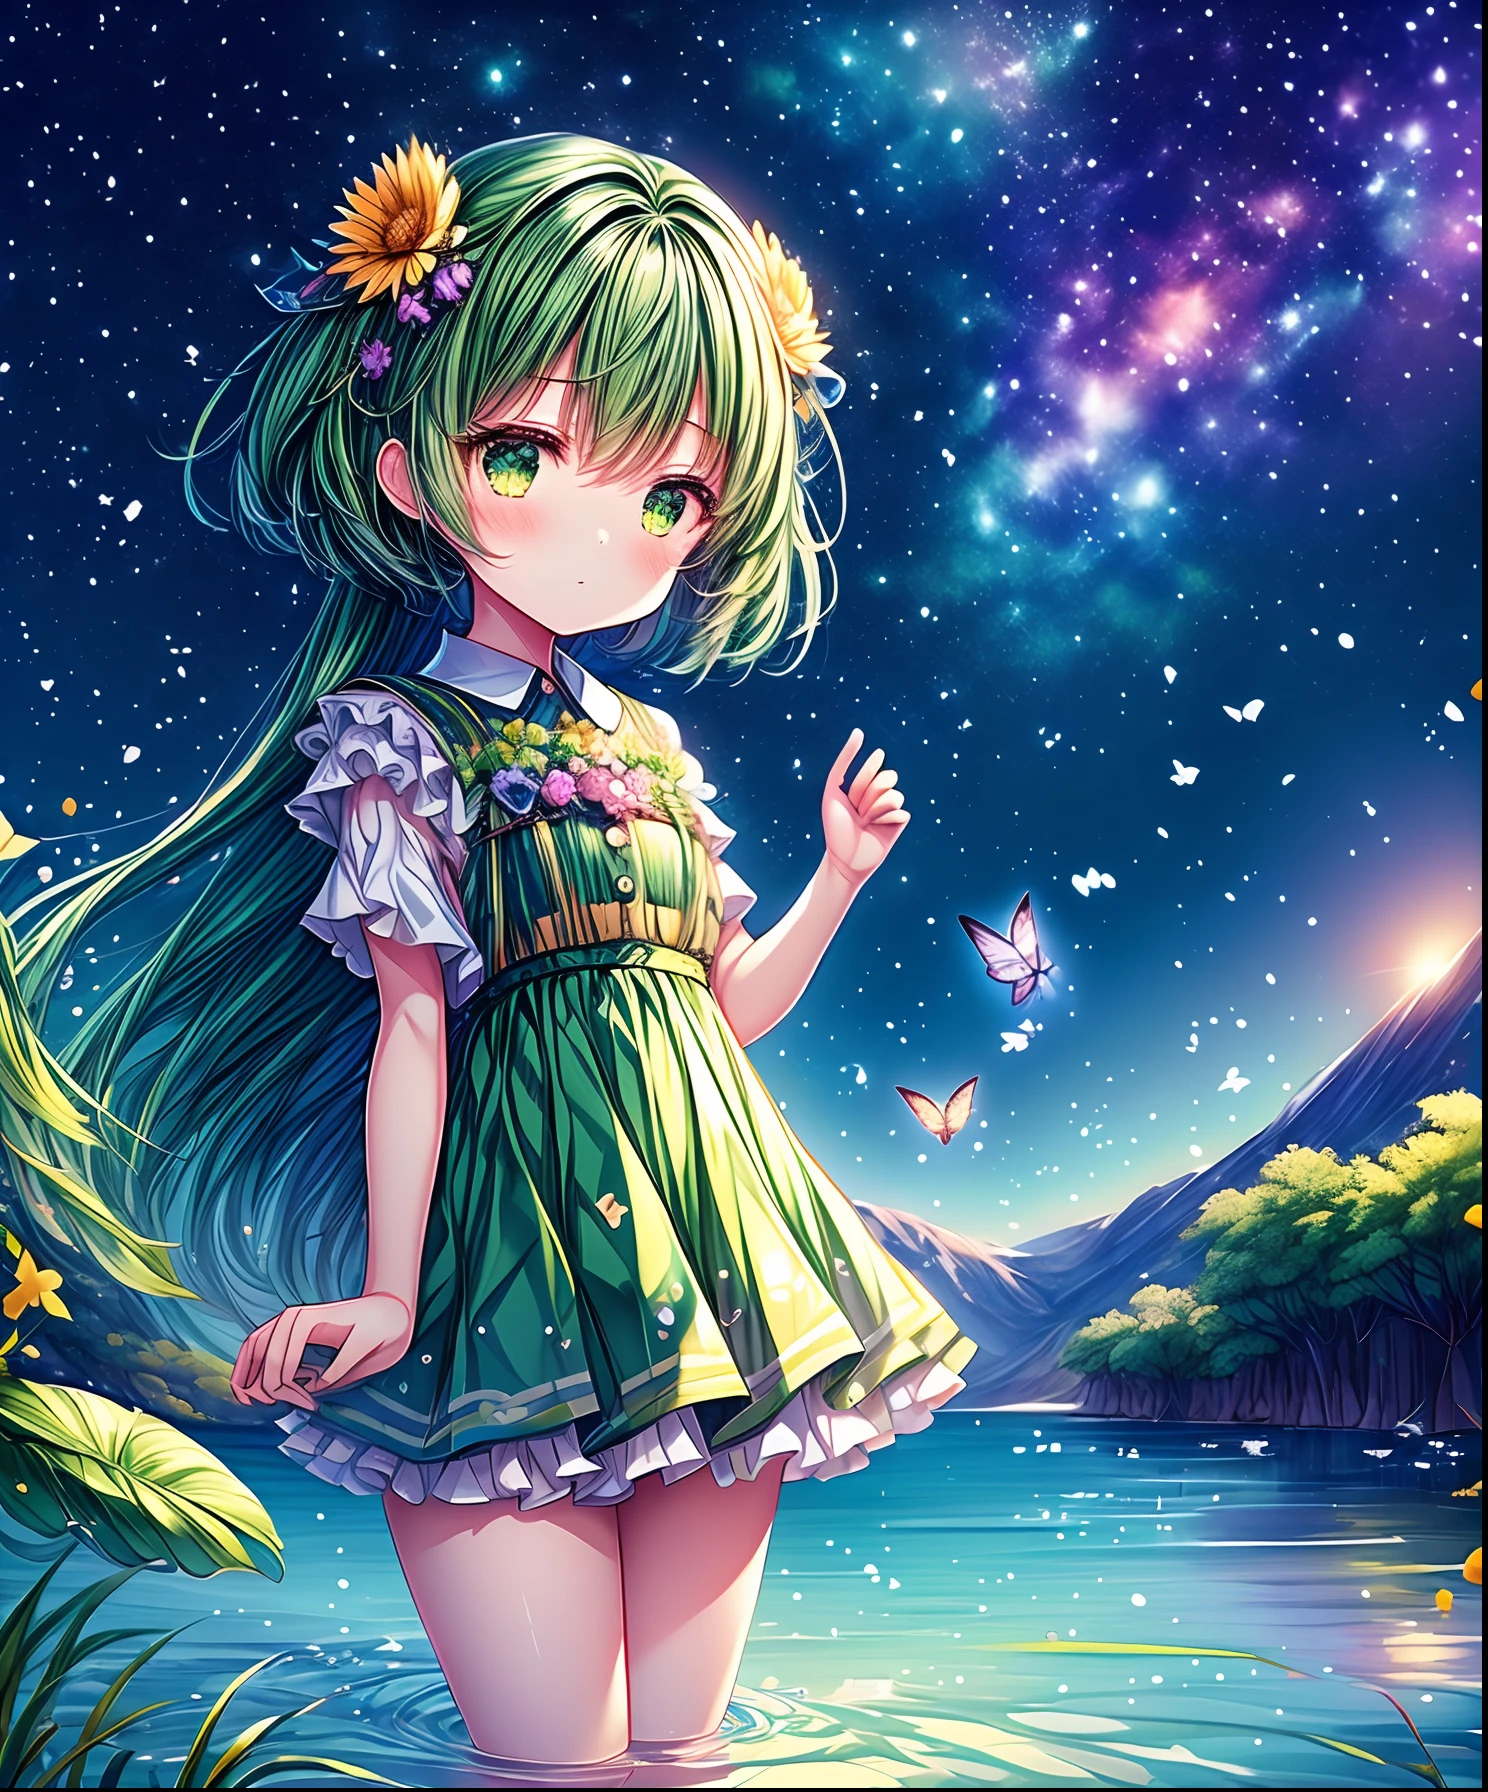 Cute girl characters、Green grass々Drawing a butterfly flying over the water, Looking up at the starry sky. Surround her with colorful nebulae and colorful forests.